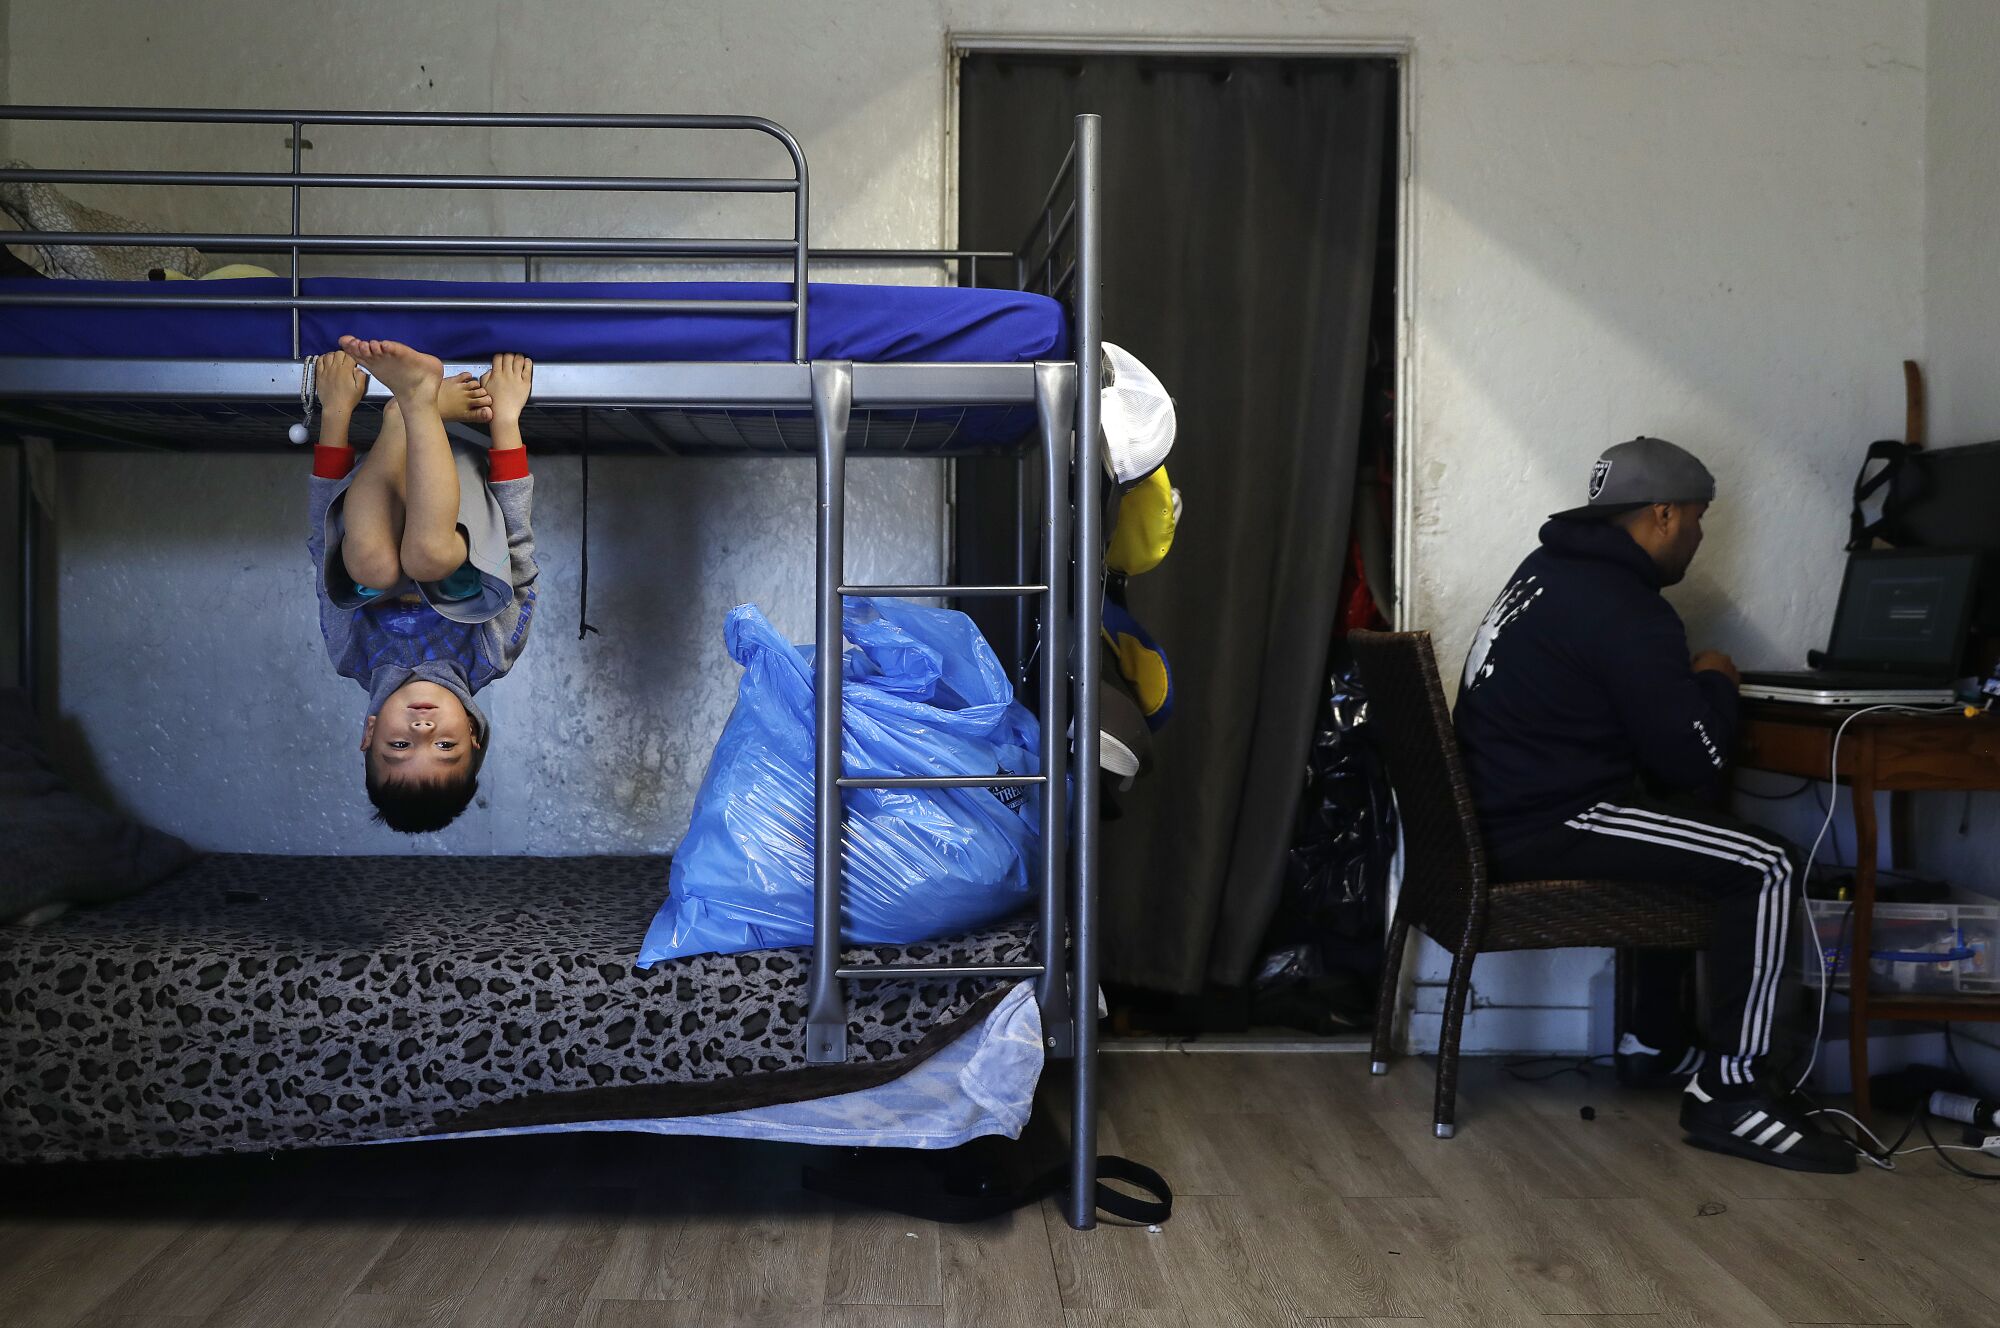 Emiliano Rodriguez-Donantonio, 5, hangs upside down from a bunk bed in the family's living room  in Los Angeles.